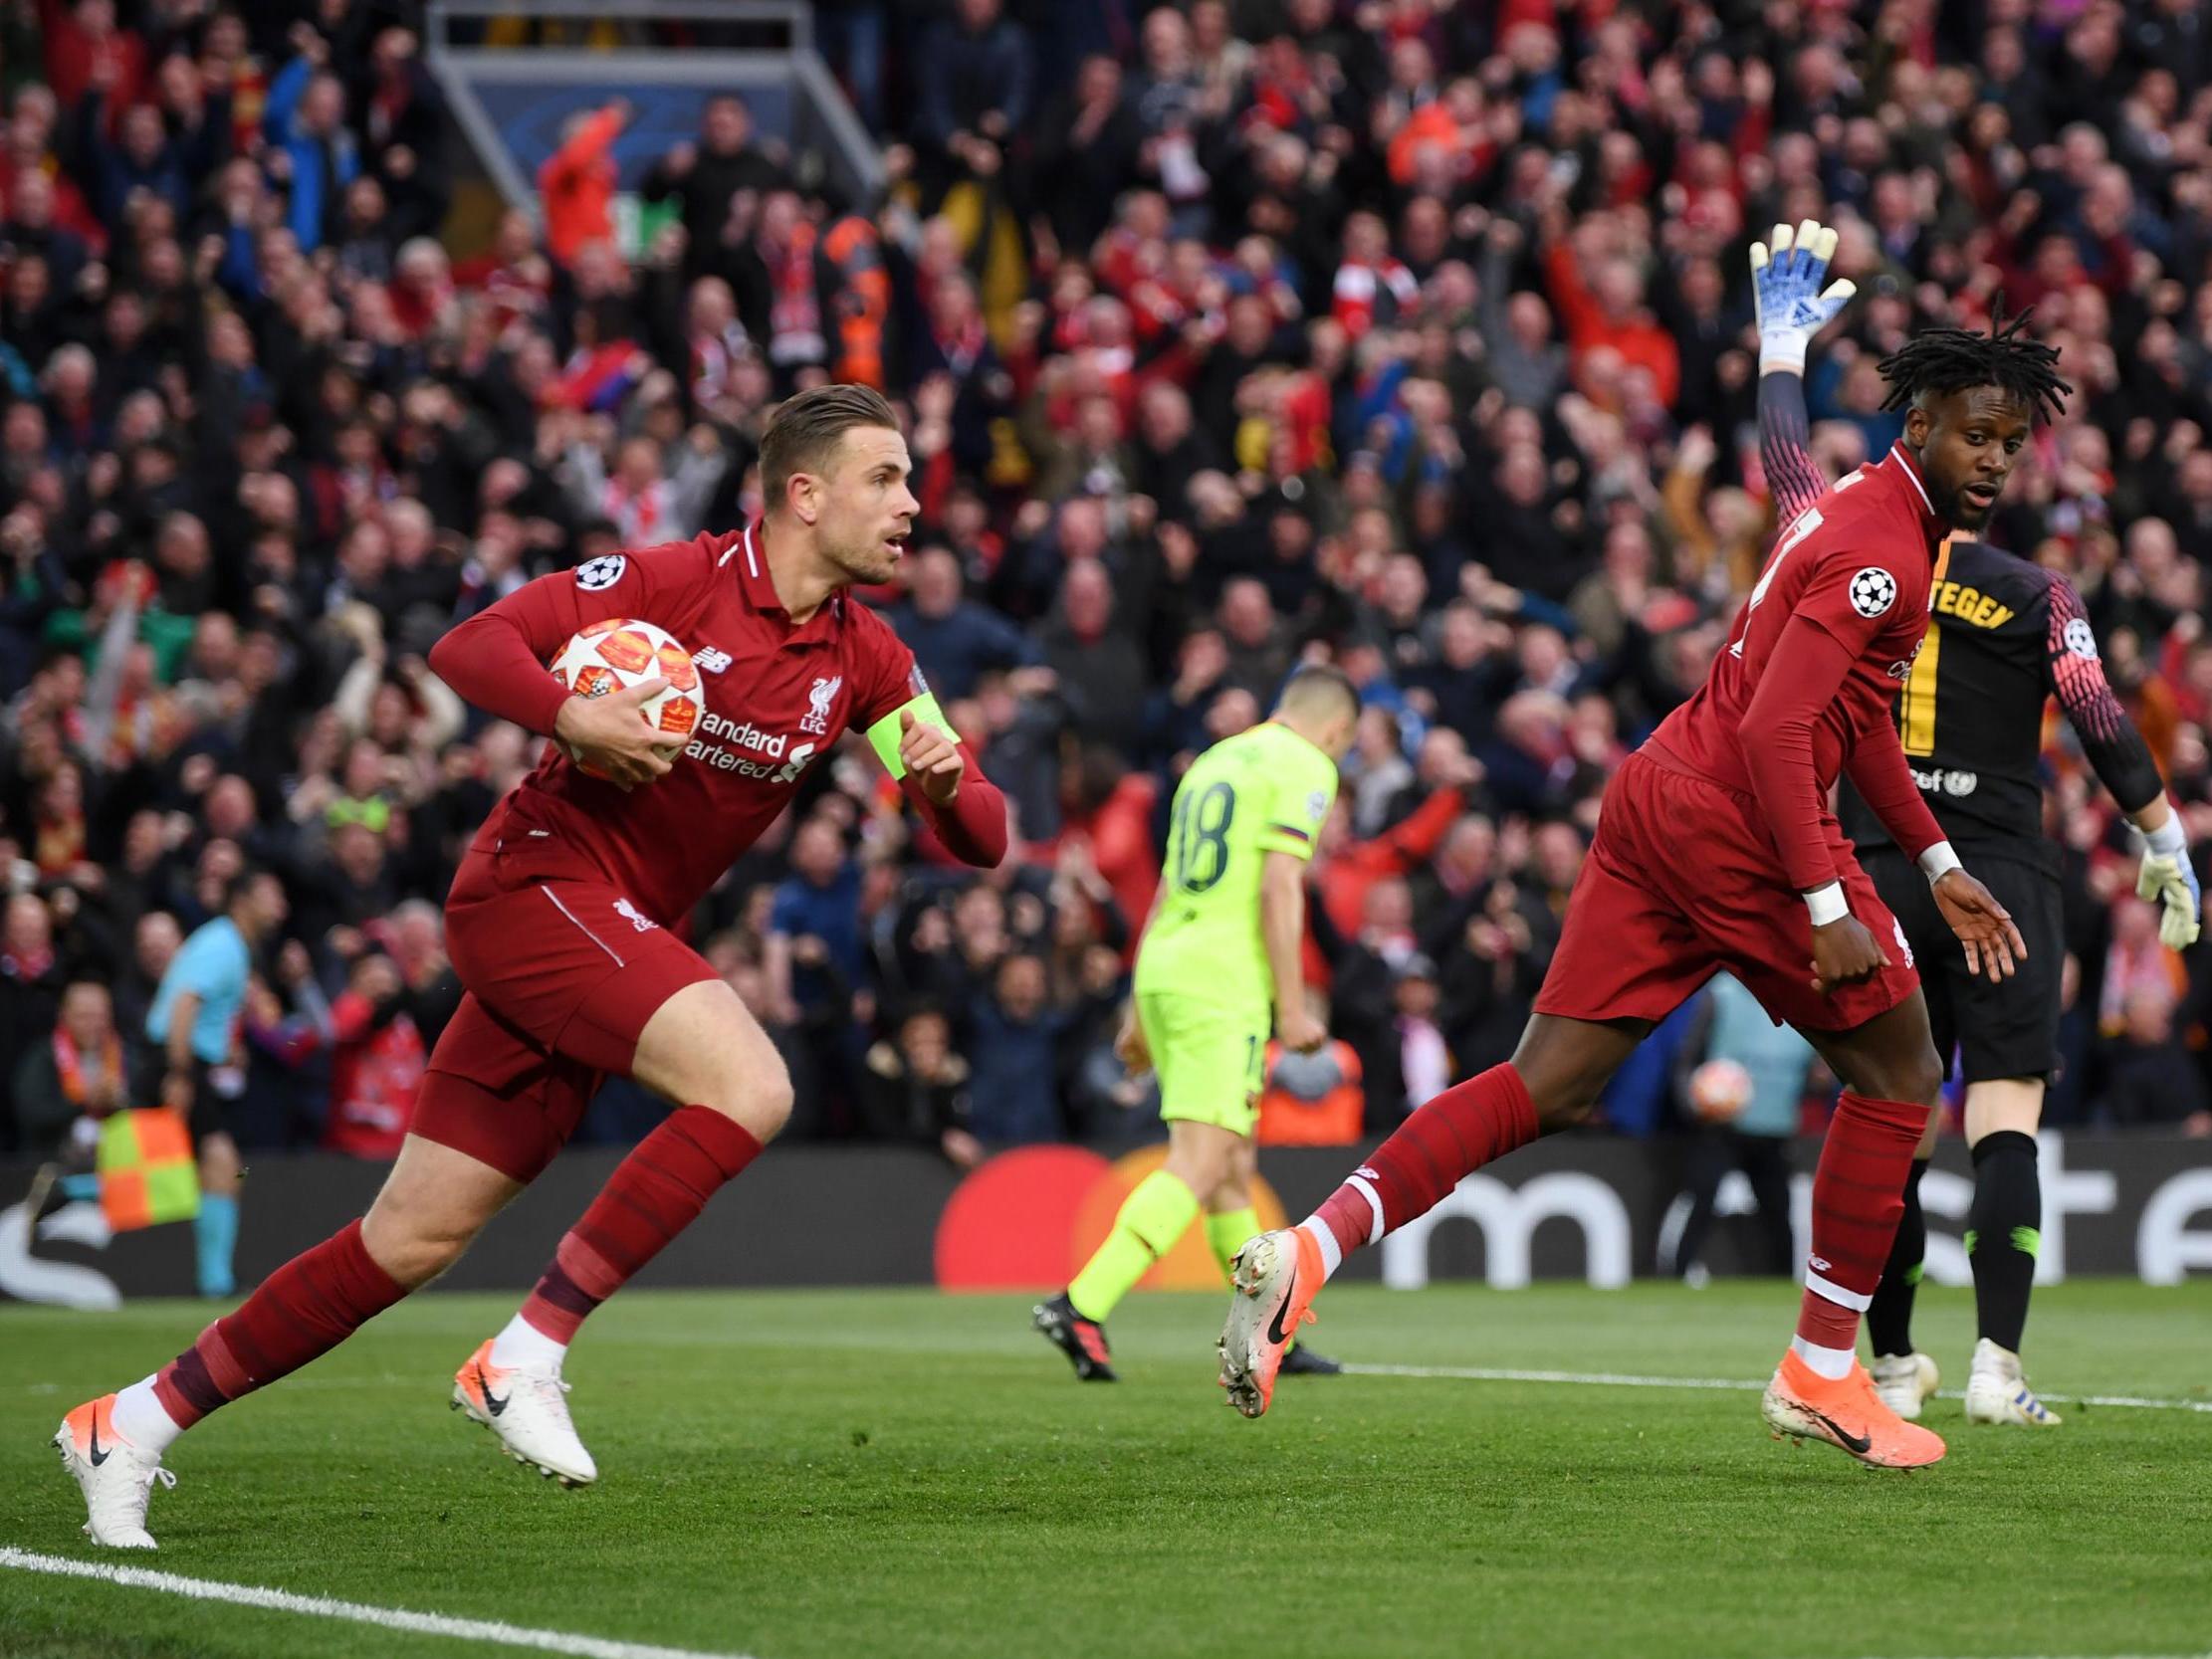 Origi gives Liverpool the lead after just seven minutes